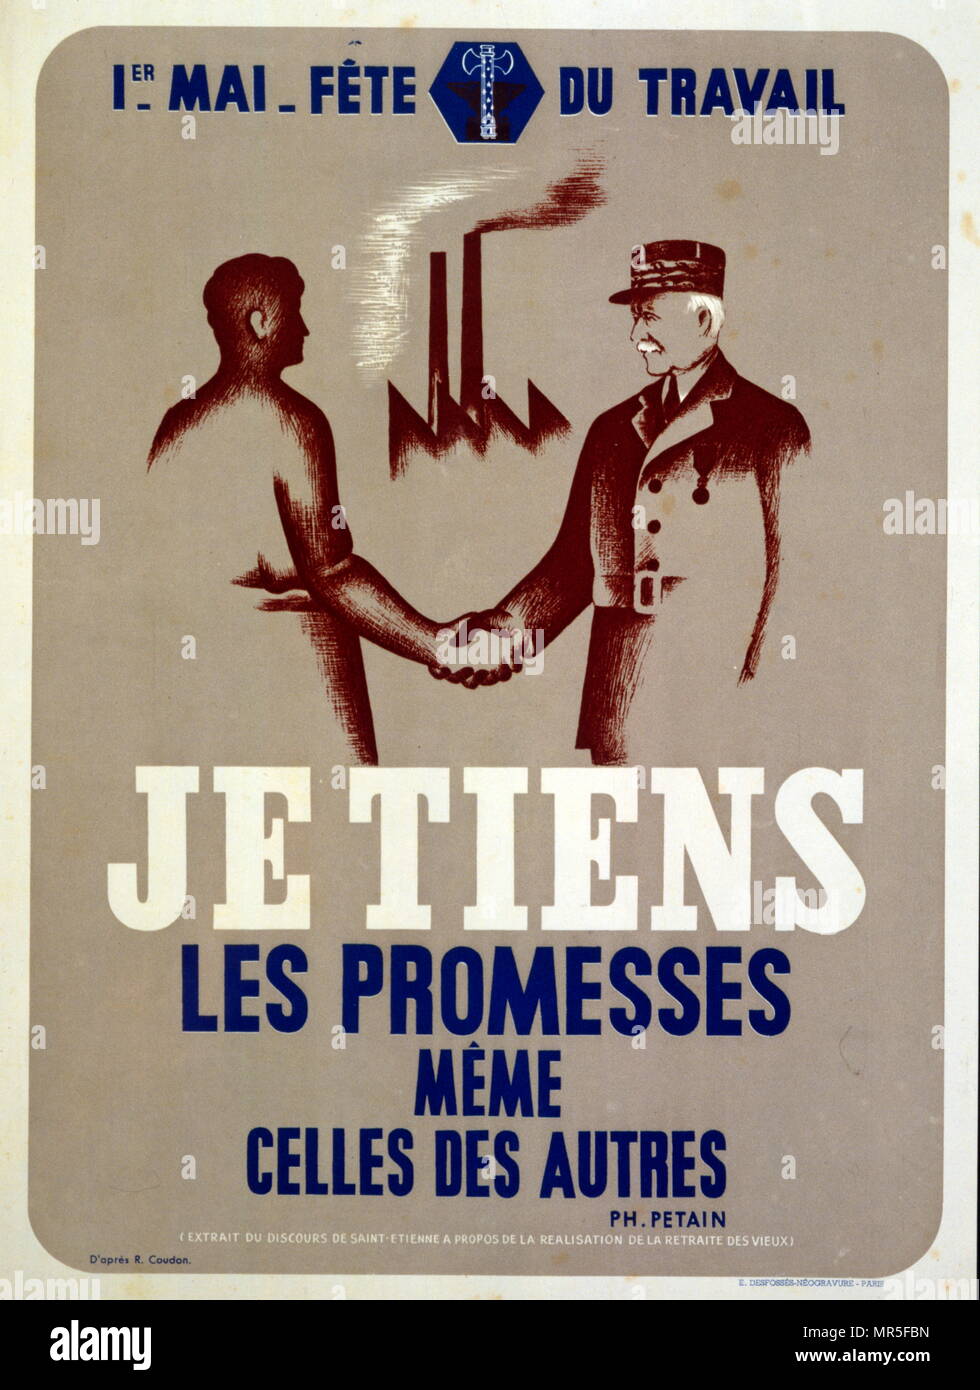 Propaganda poster issued by Marshall Petain the Vichy French Leader for May Day workers festival in Wartime France. Stock Photo